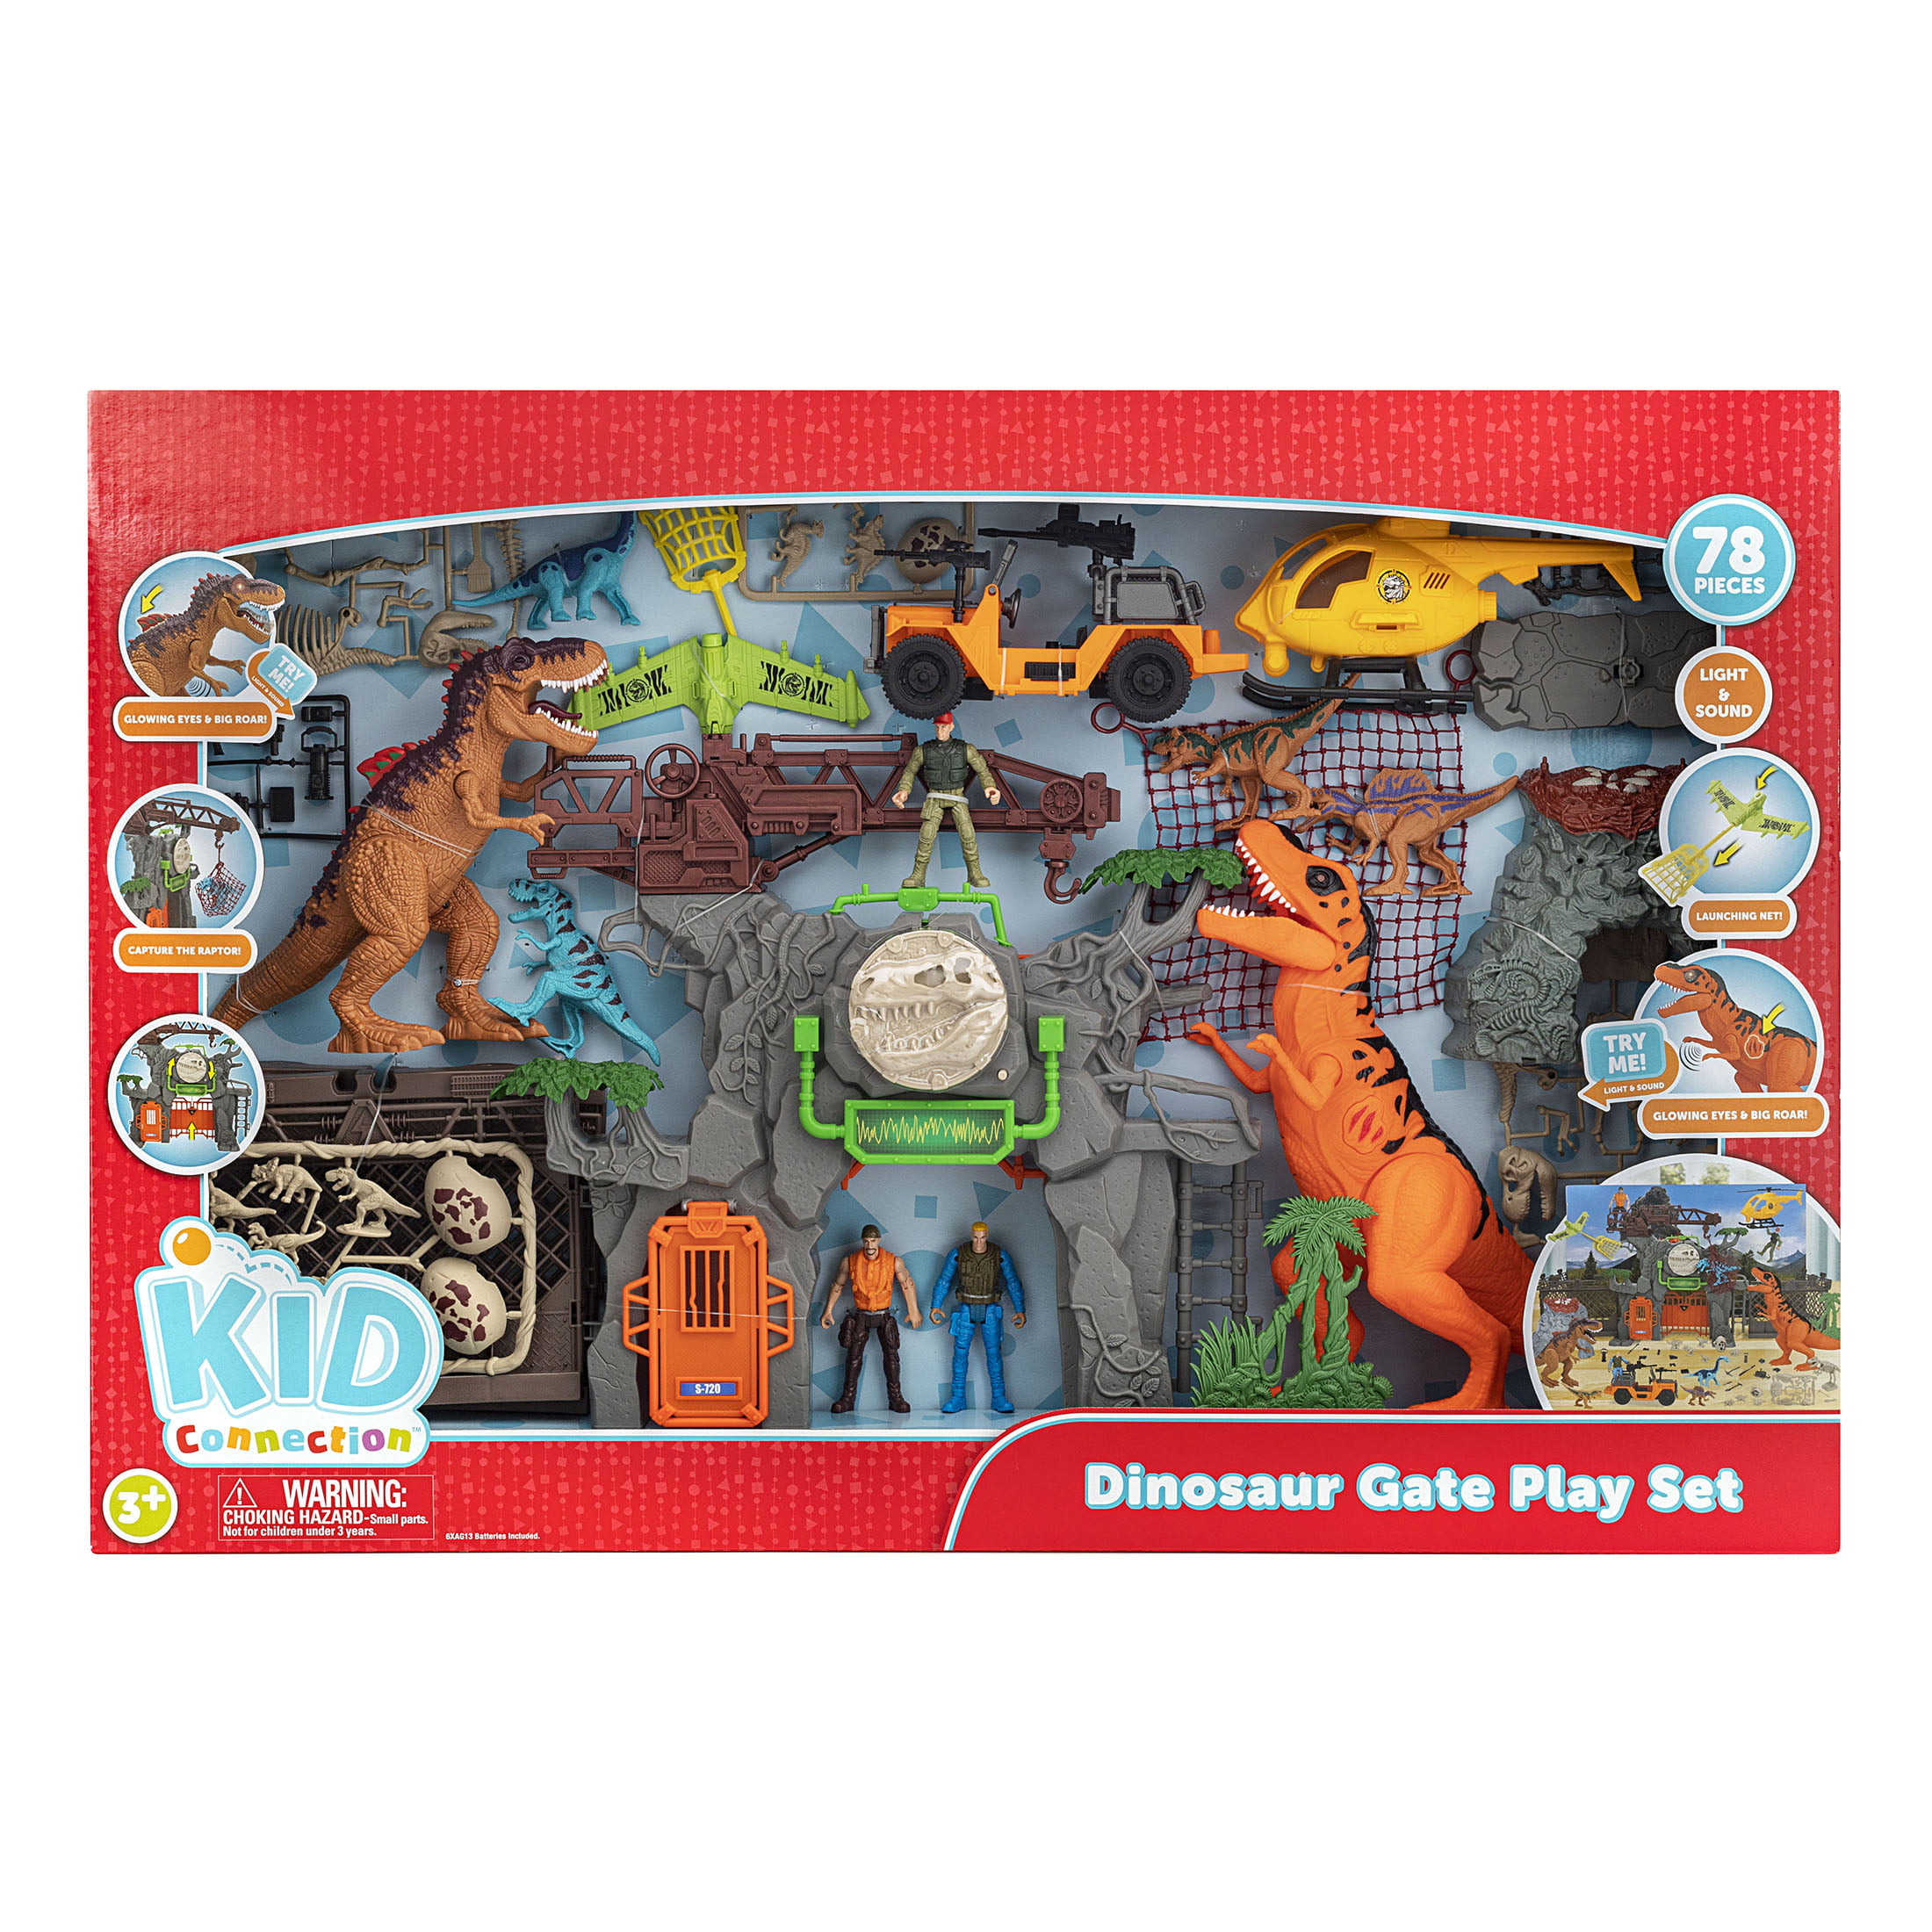 New In Box!! 46 piece Kid Connection Dinosaur Gate Play Set 